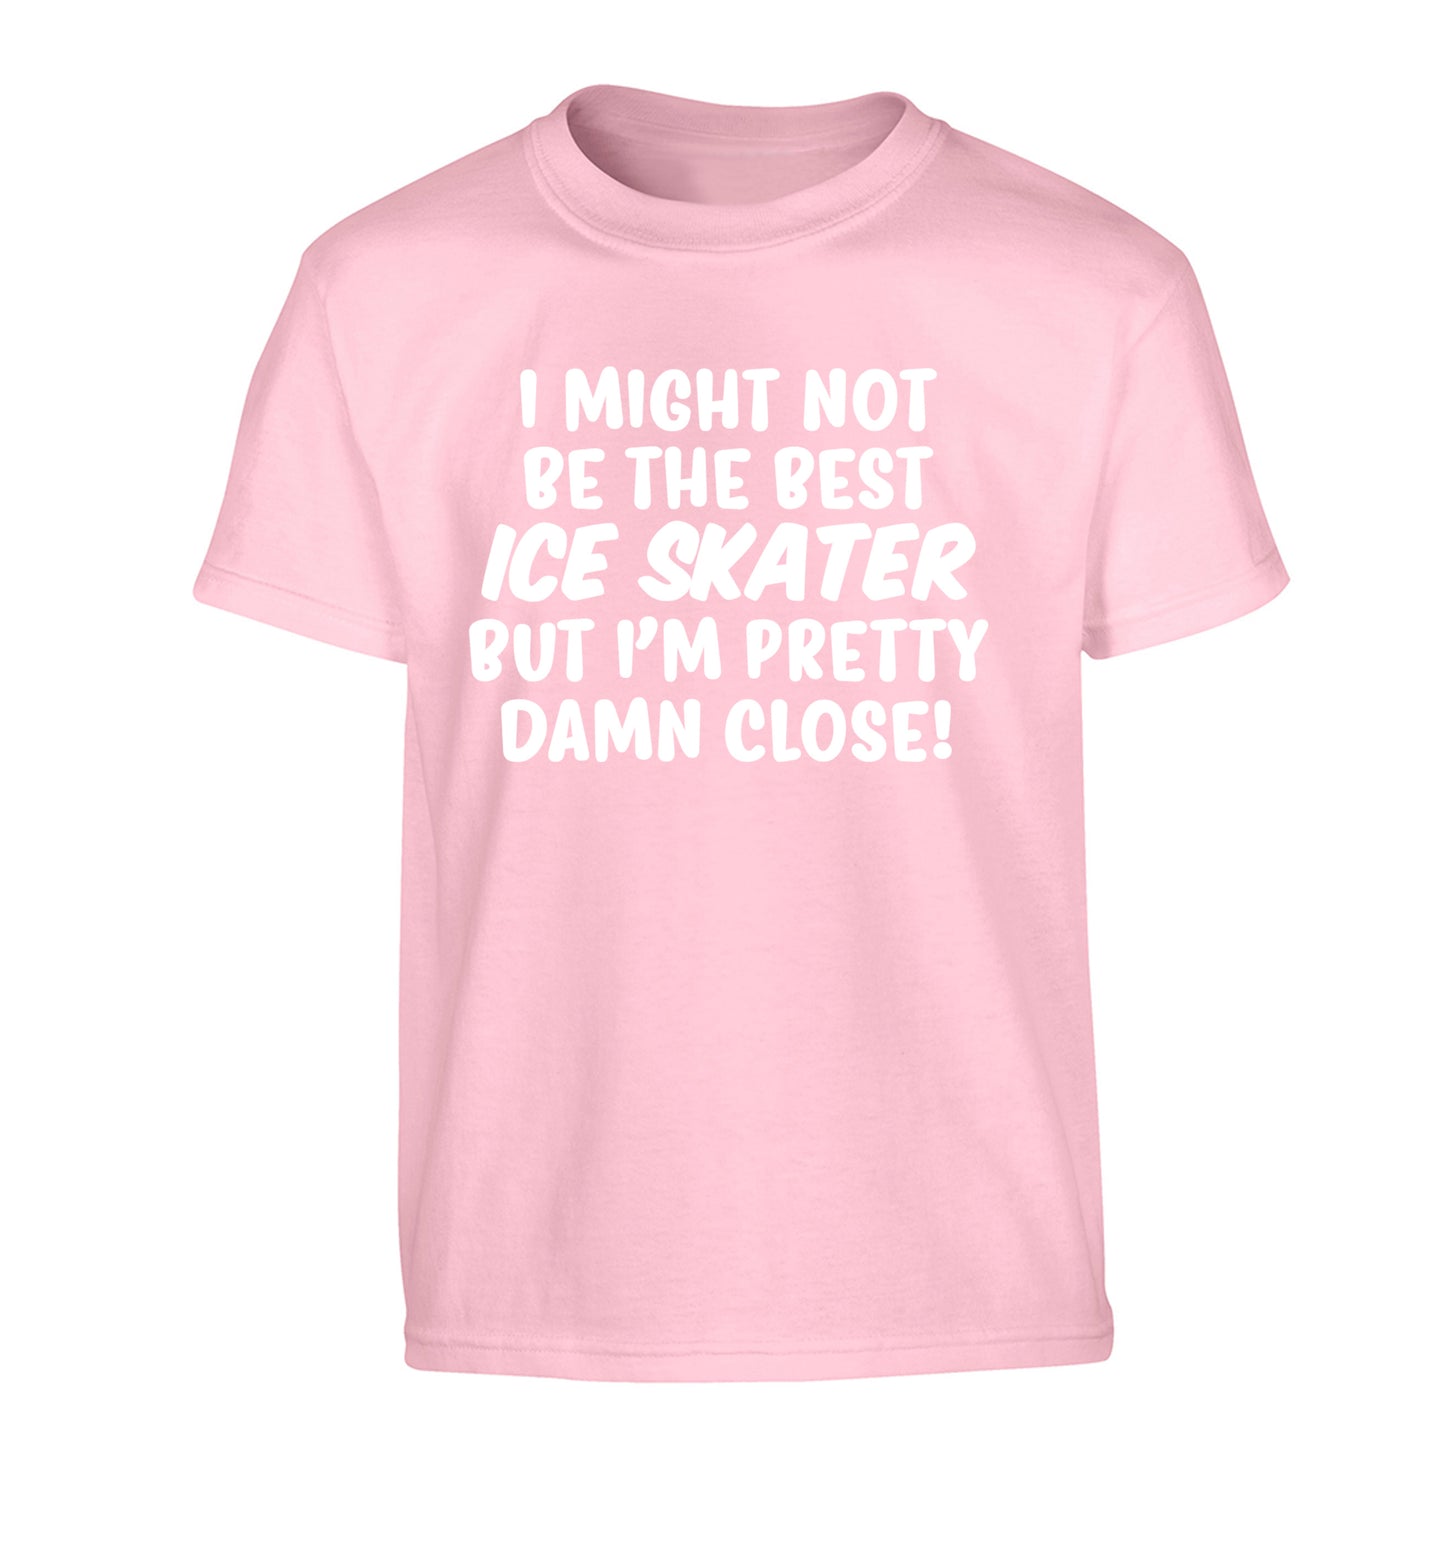 I might not be the best ice skater but I'm pretty damn close! Children's light pink Tshirt 12-14 Years